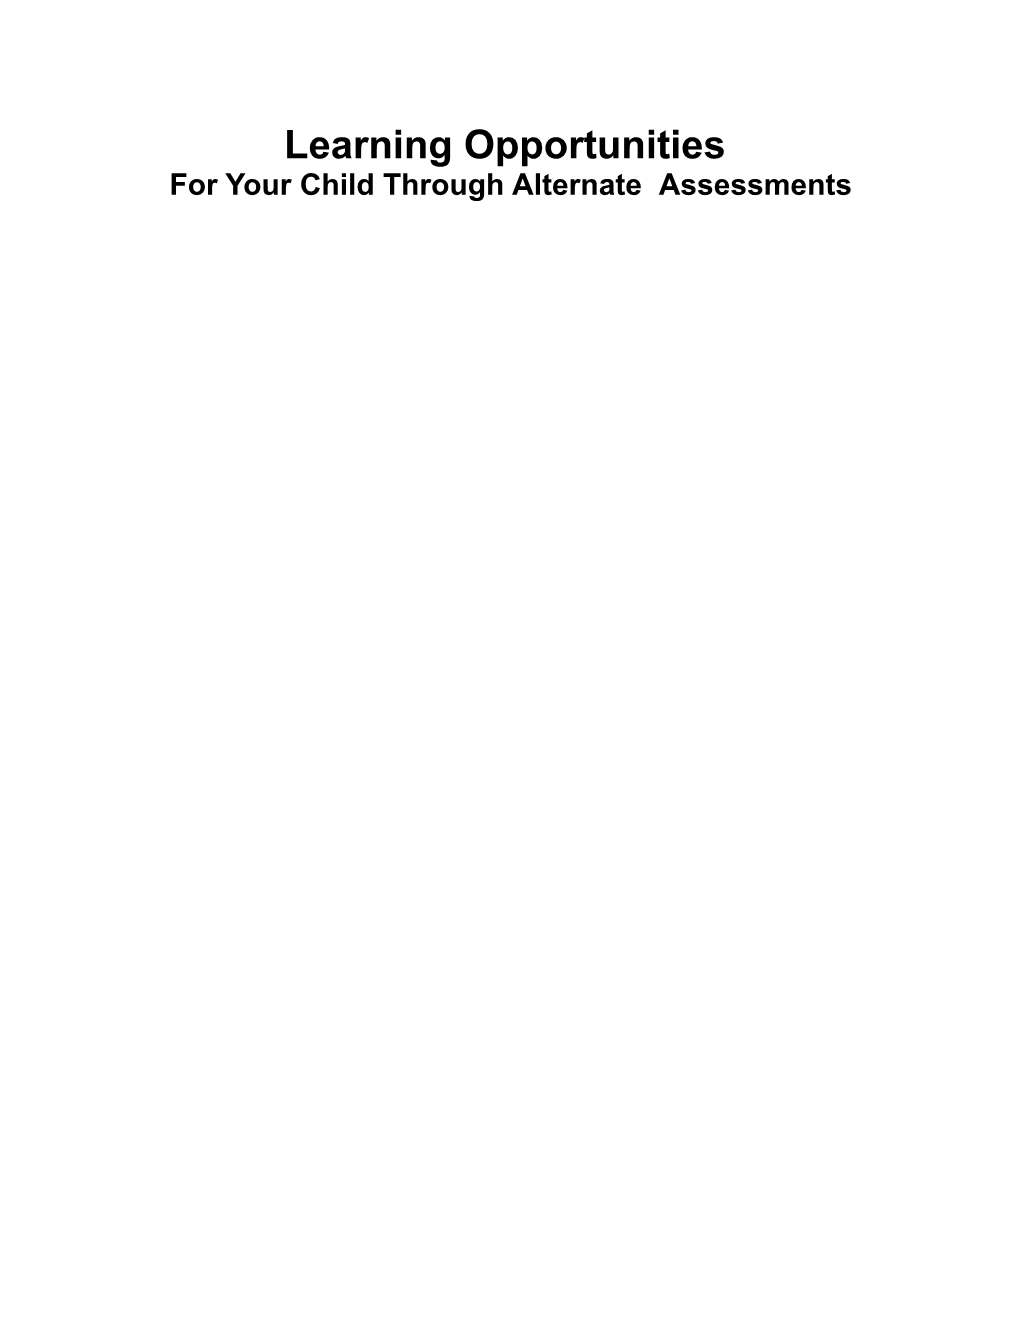 Learning Opportunities for Your Child Through Alternate Assessments (MS Word)